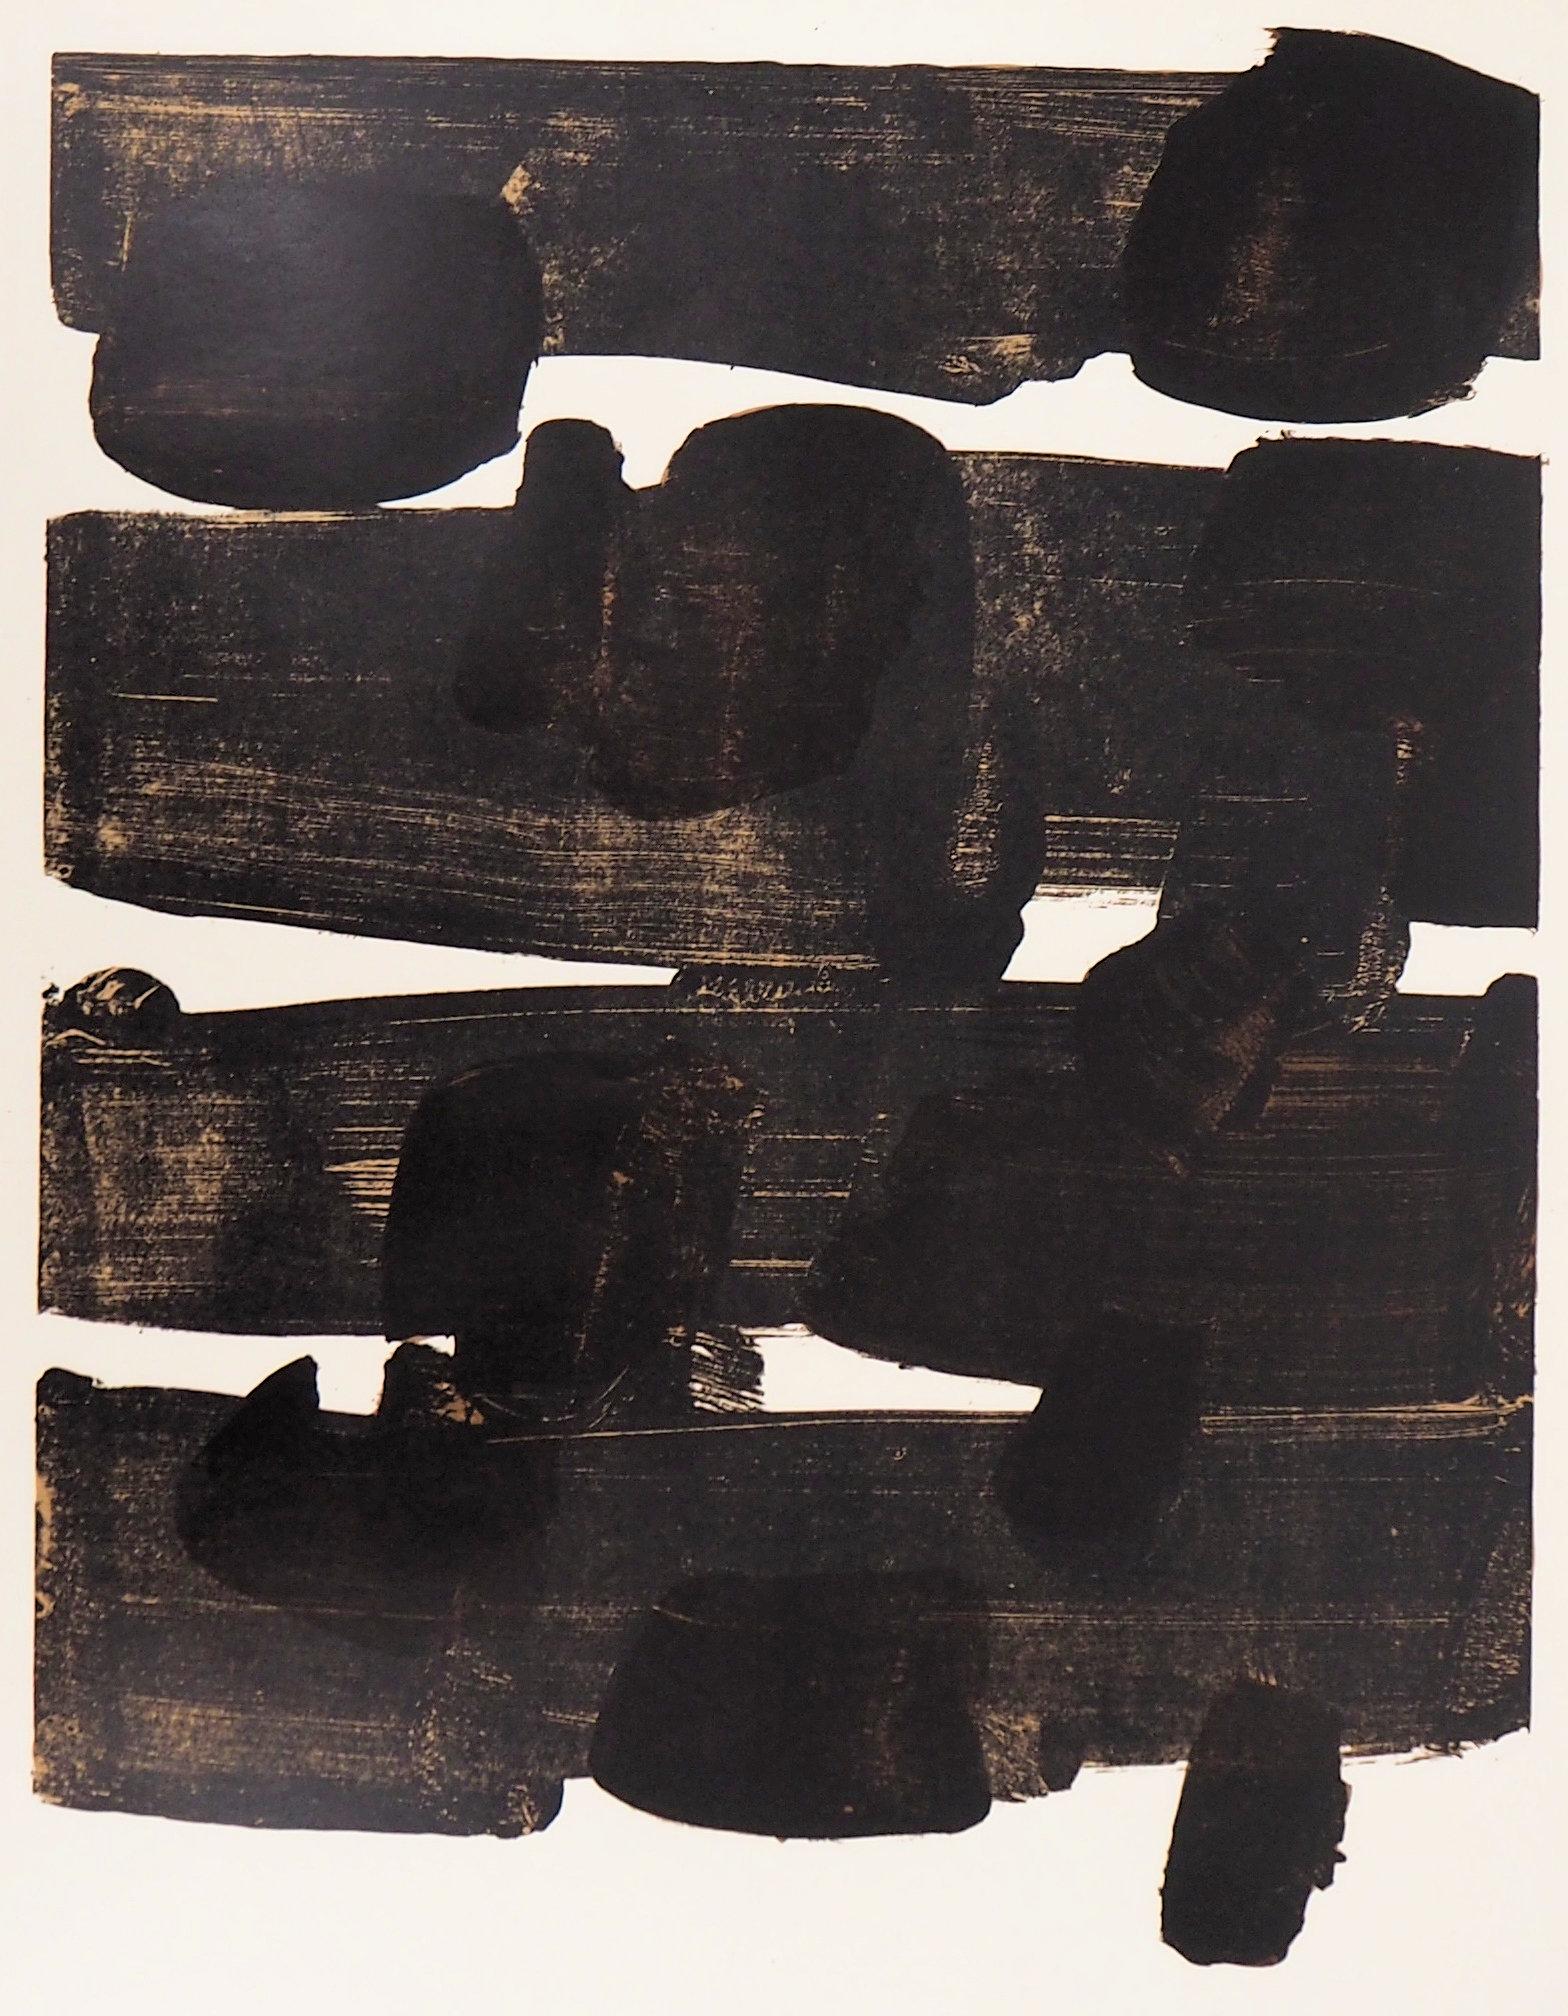 Lithograph n° 12 - Original Stone Lithograph - 1964 - Print by Pierre Soulages